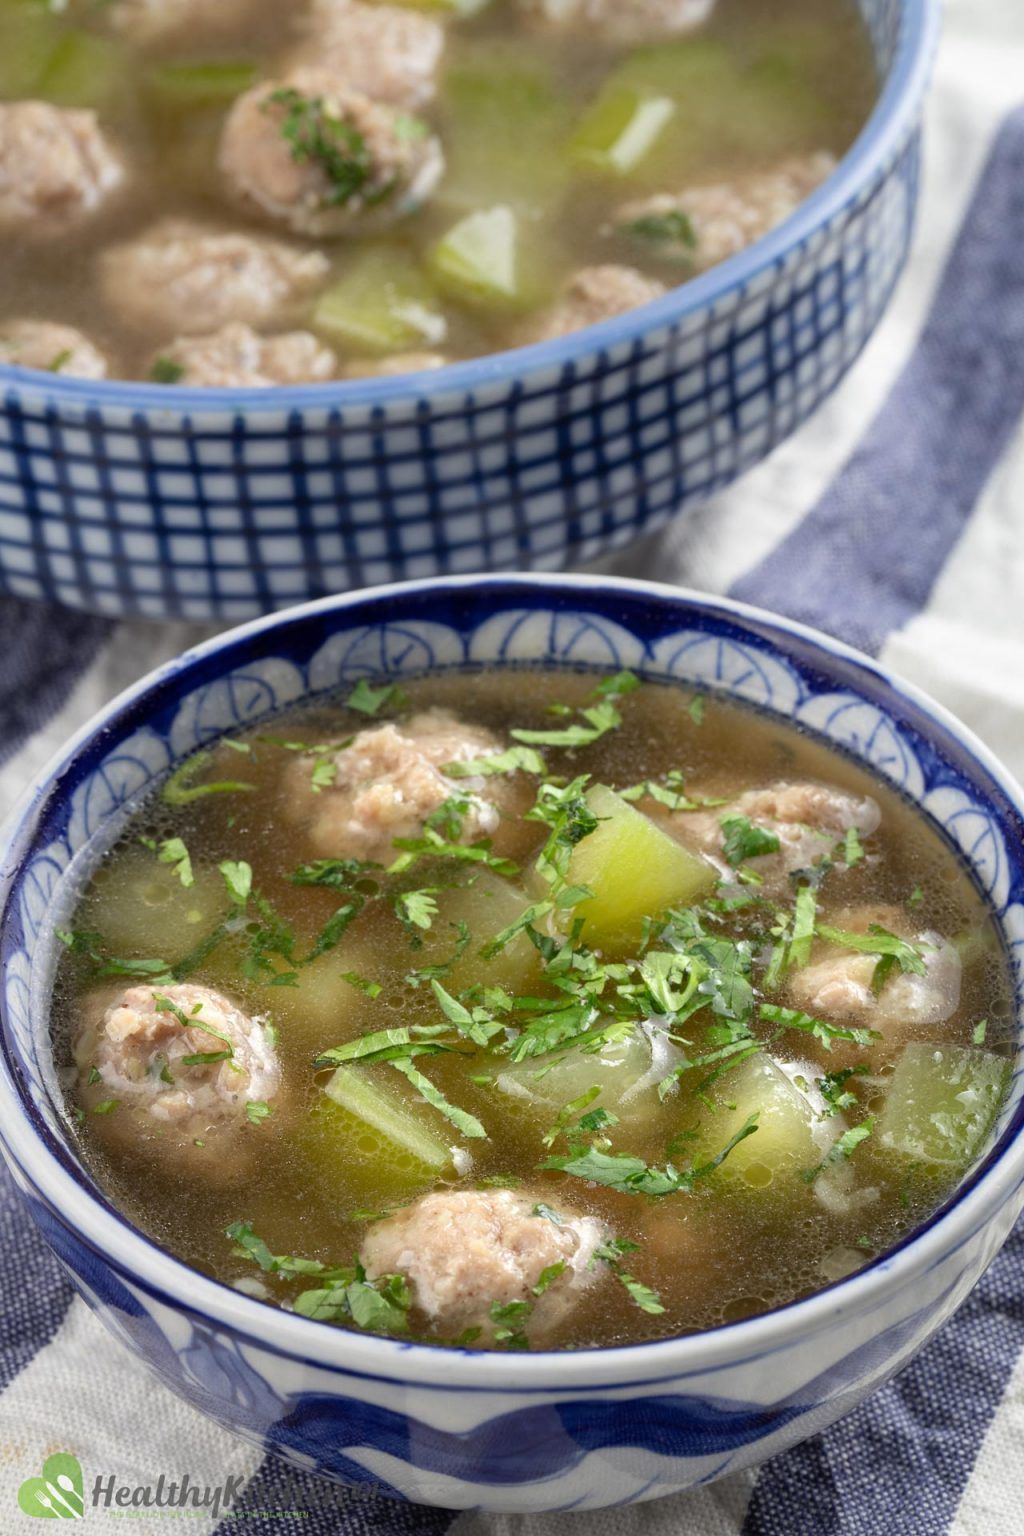 Winter Melon Meatball Soup Recipe - A Healthy Chinese Comfort Food